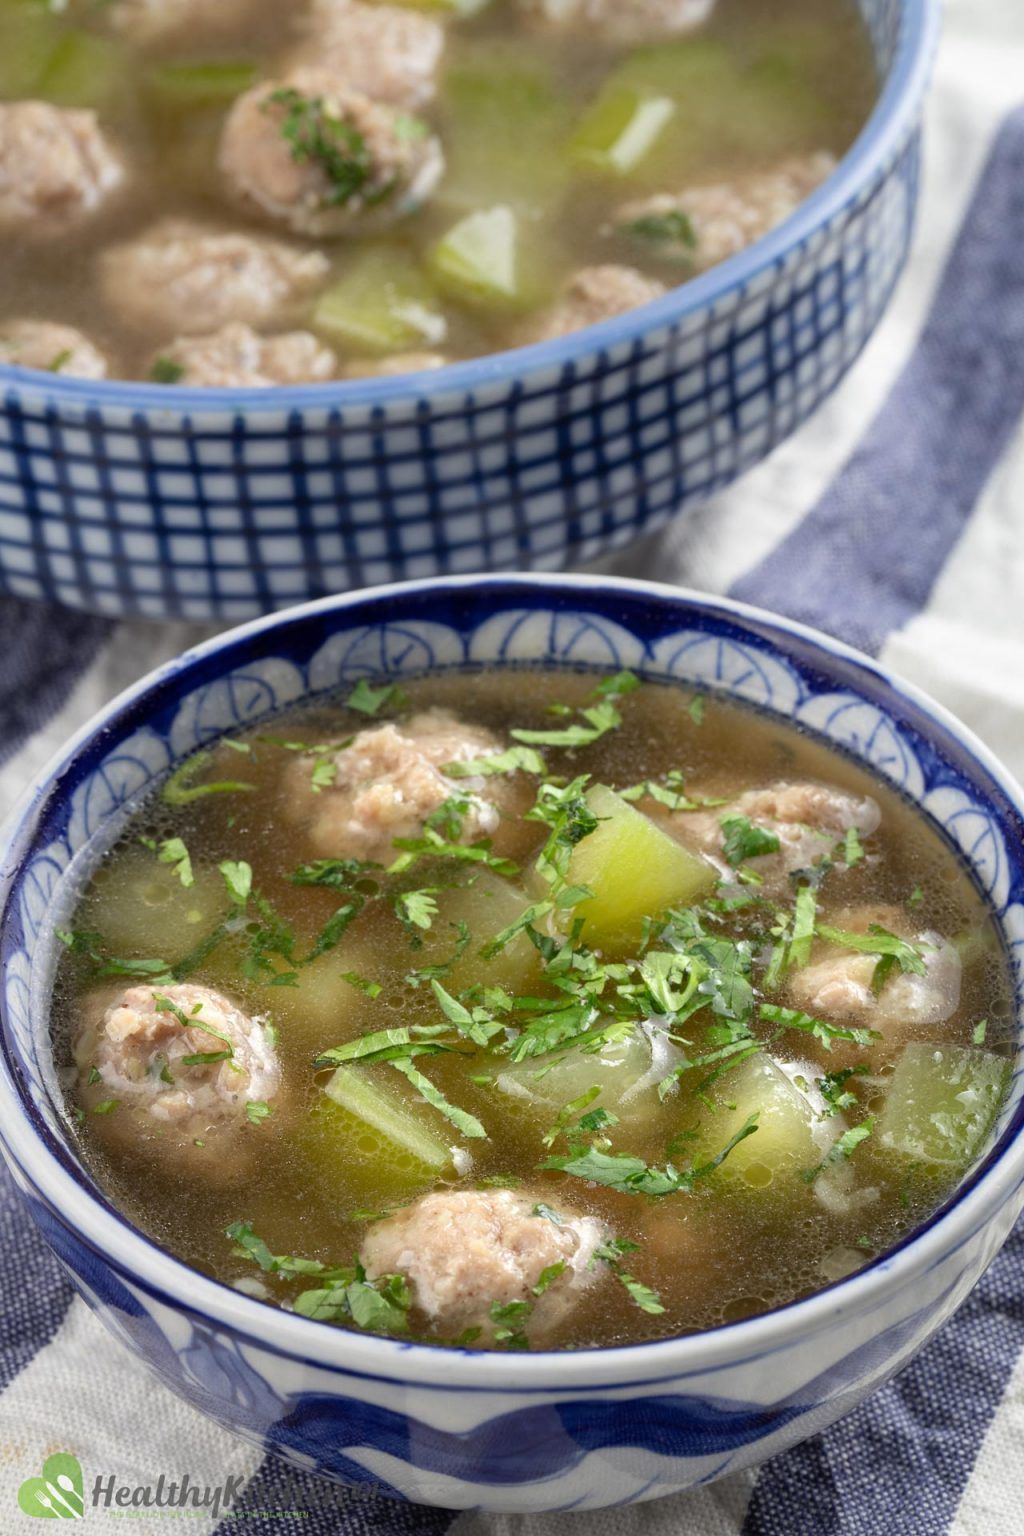 Winter Melon Meatball Soup Recipe - A Healthy Chinese Comfort Food